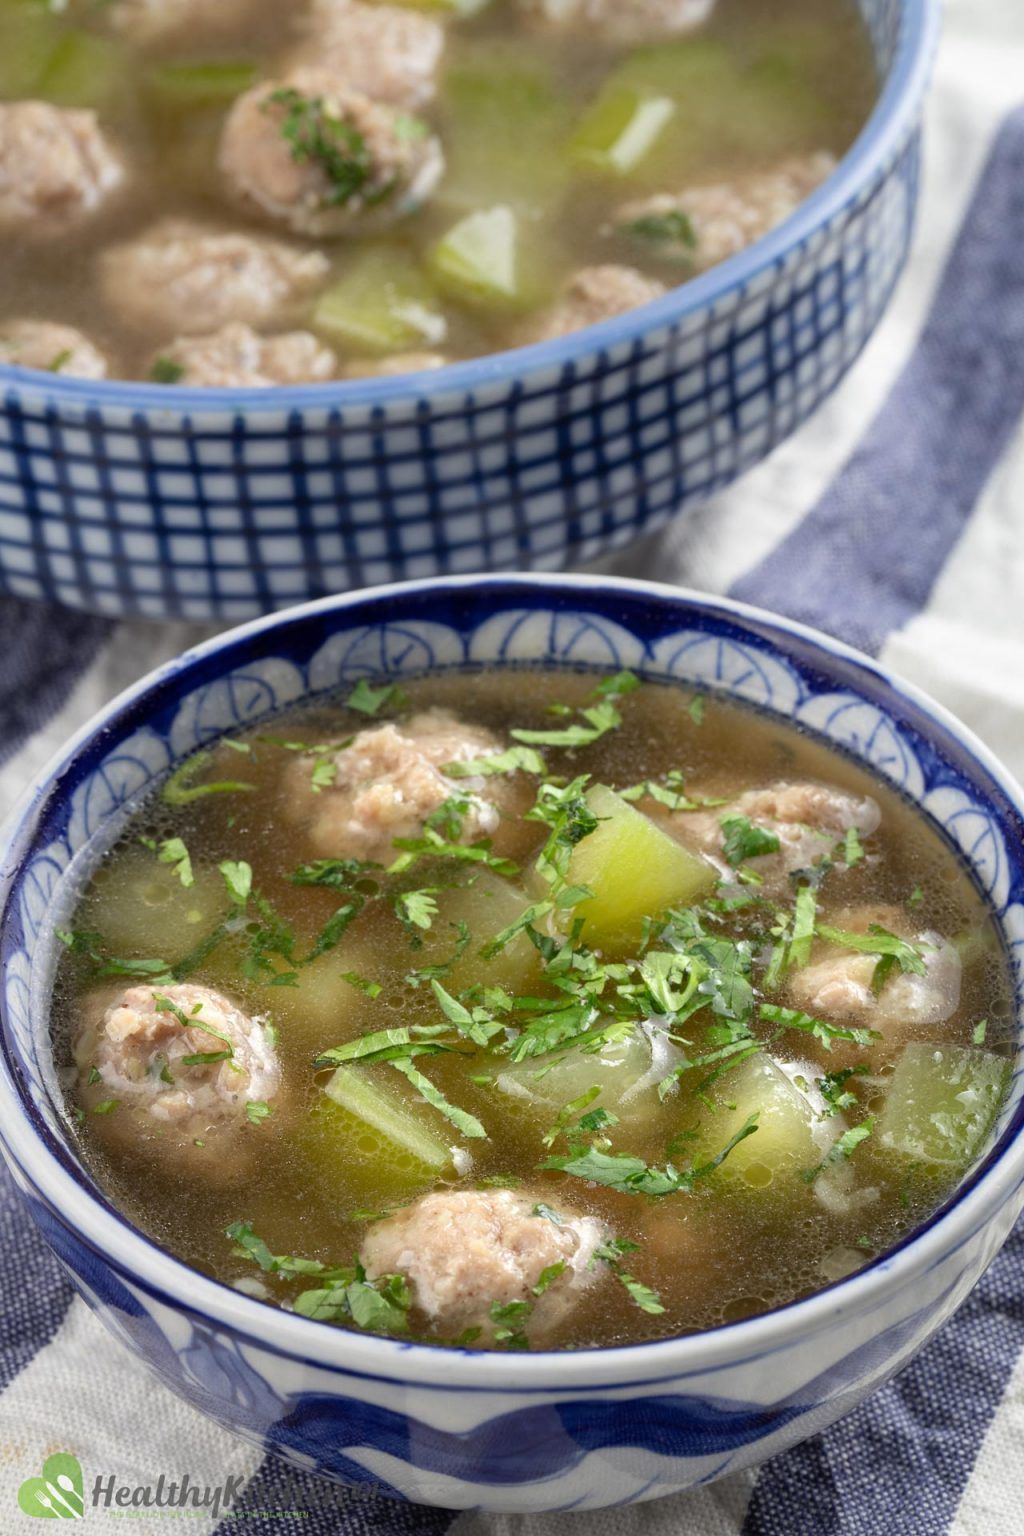 Winter Melon Meatball Soup Recipe - A Healthy Chinese Comfort Food